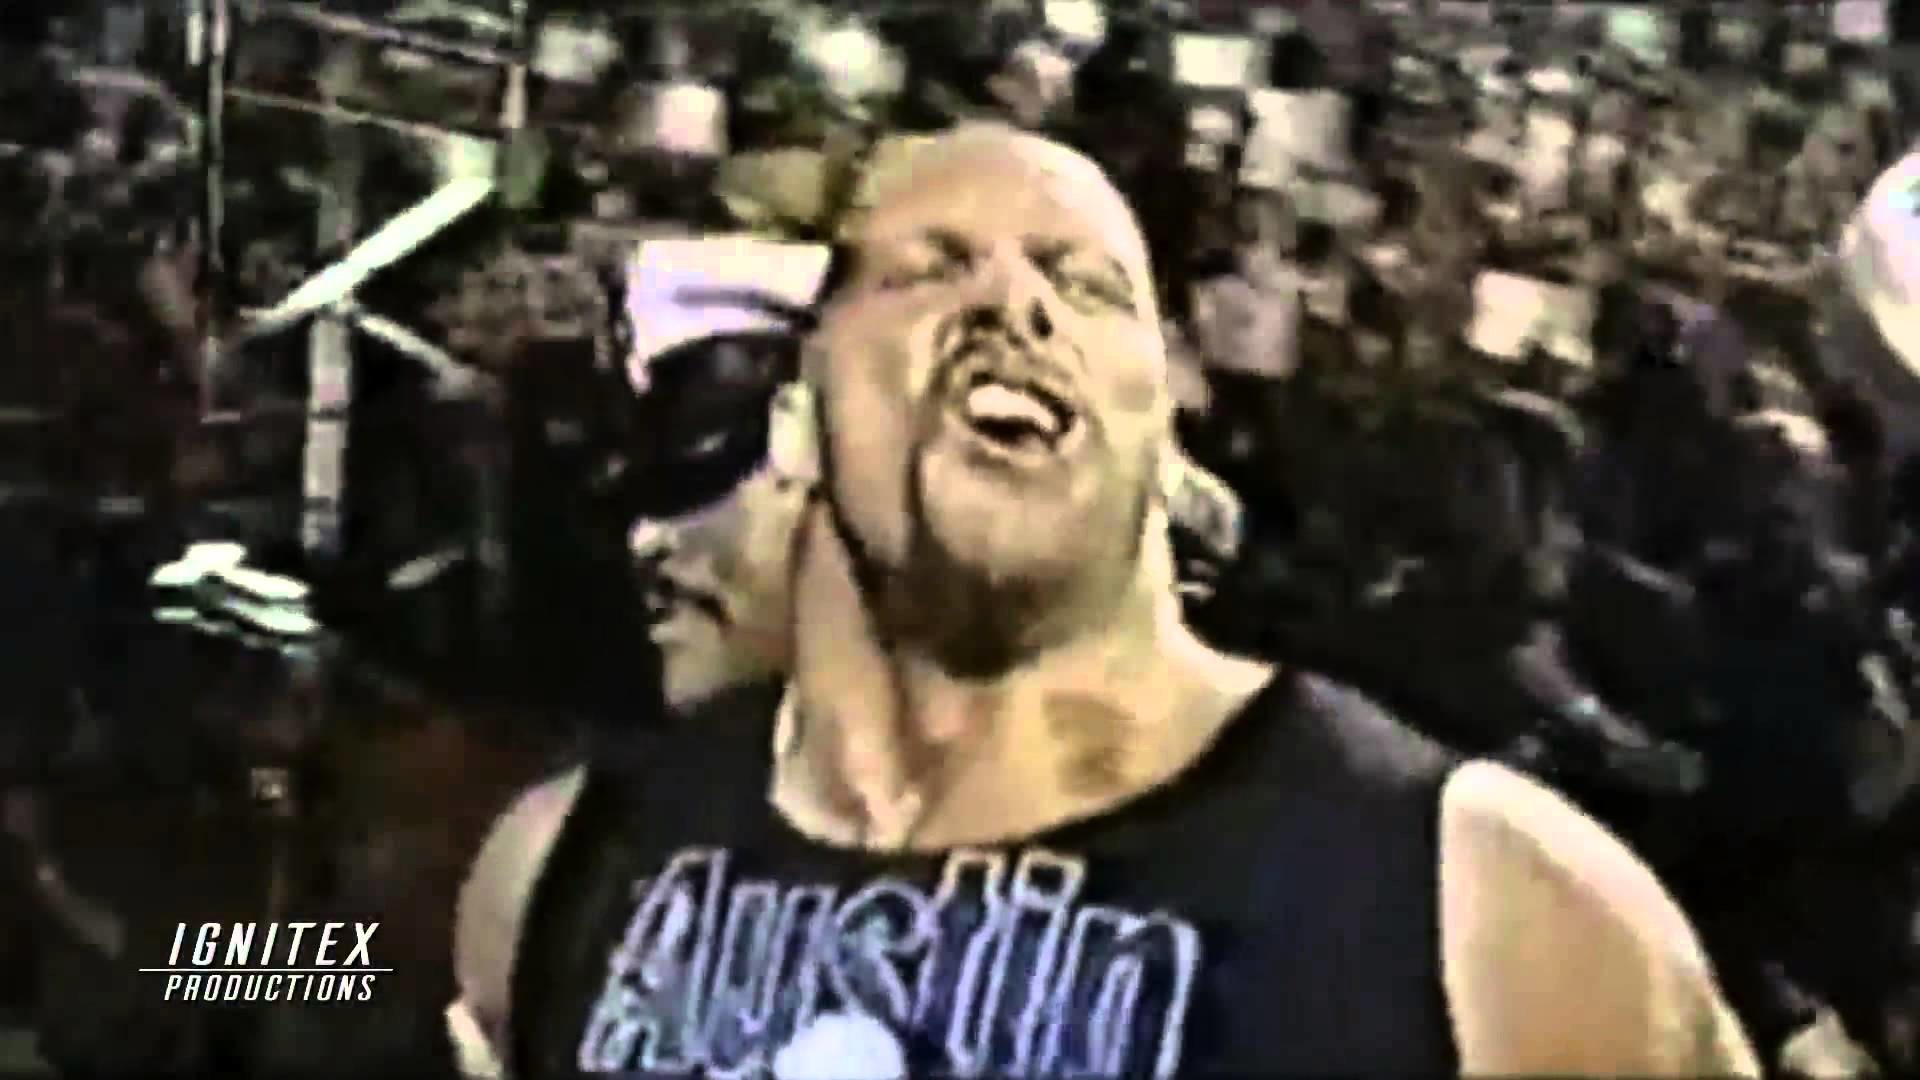 1920x1080 WWF Raw Is War 10 12 1998 Stone Cold Steve Austin and Vince Mcmahon Promo